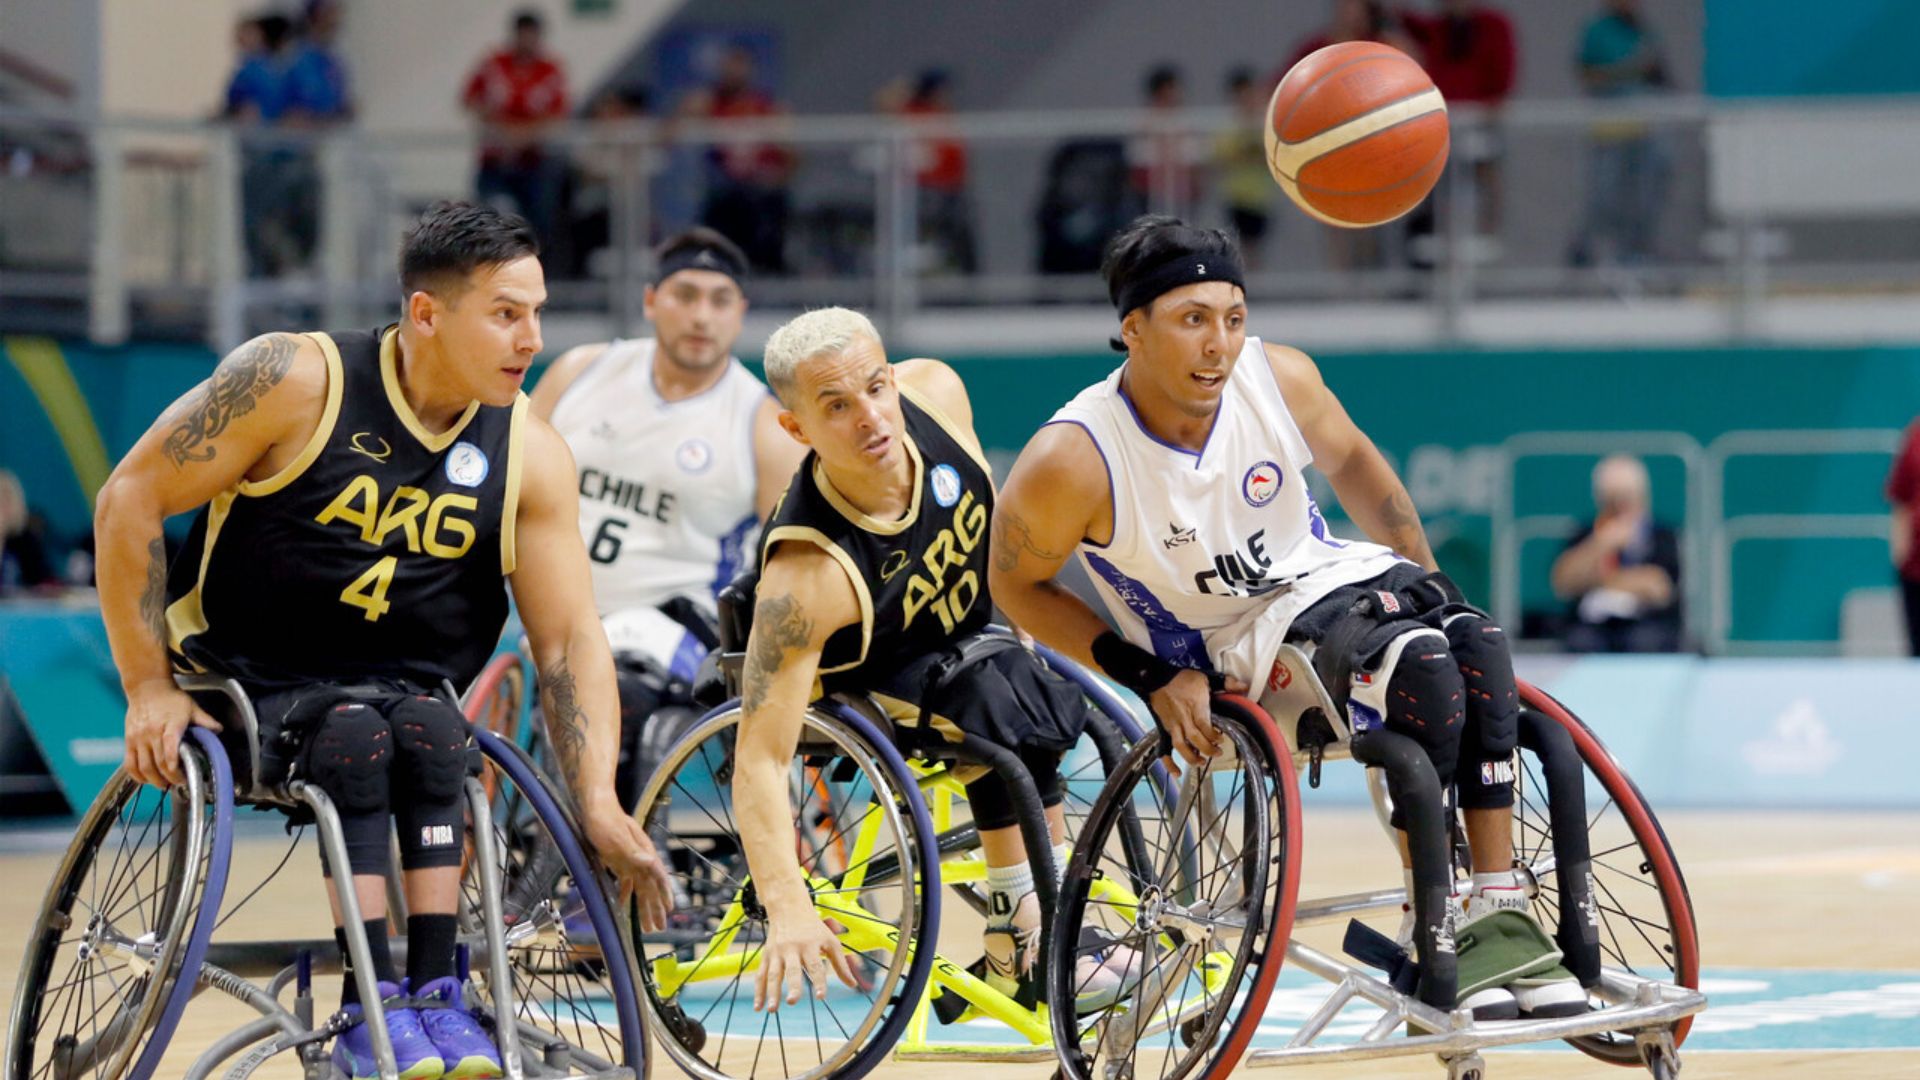 Argentina Secured a Resounding Victory Against Chile in Wheelchair Basketball